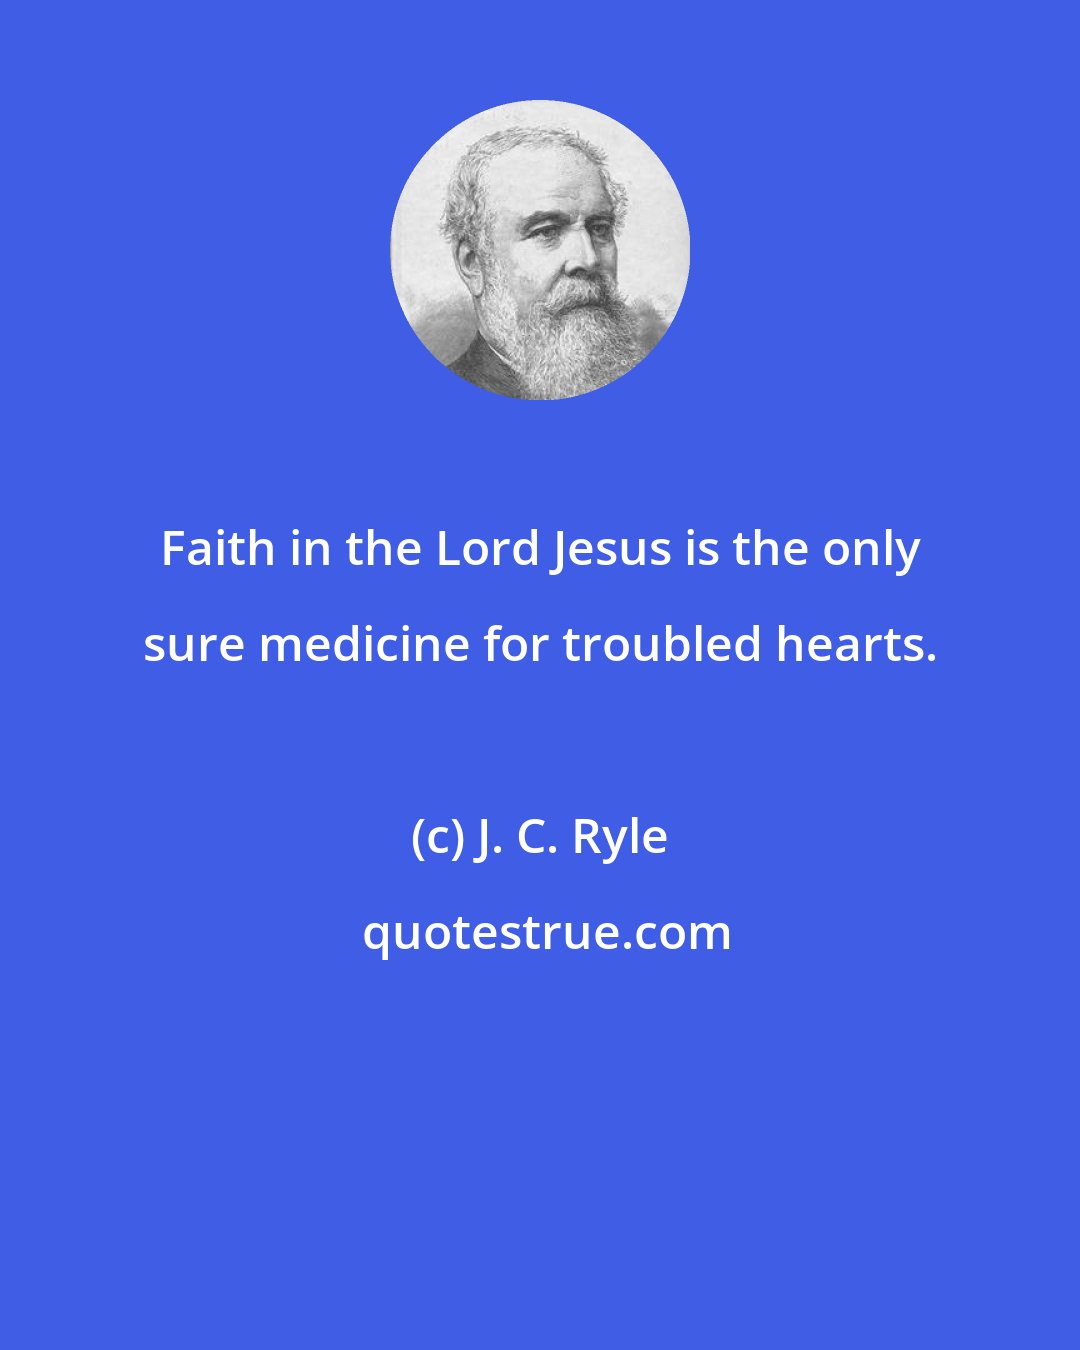 J. C. Ryle: Faith in the Lord Jesus is the only sure medicine for troubled hearts.